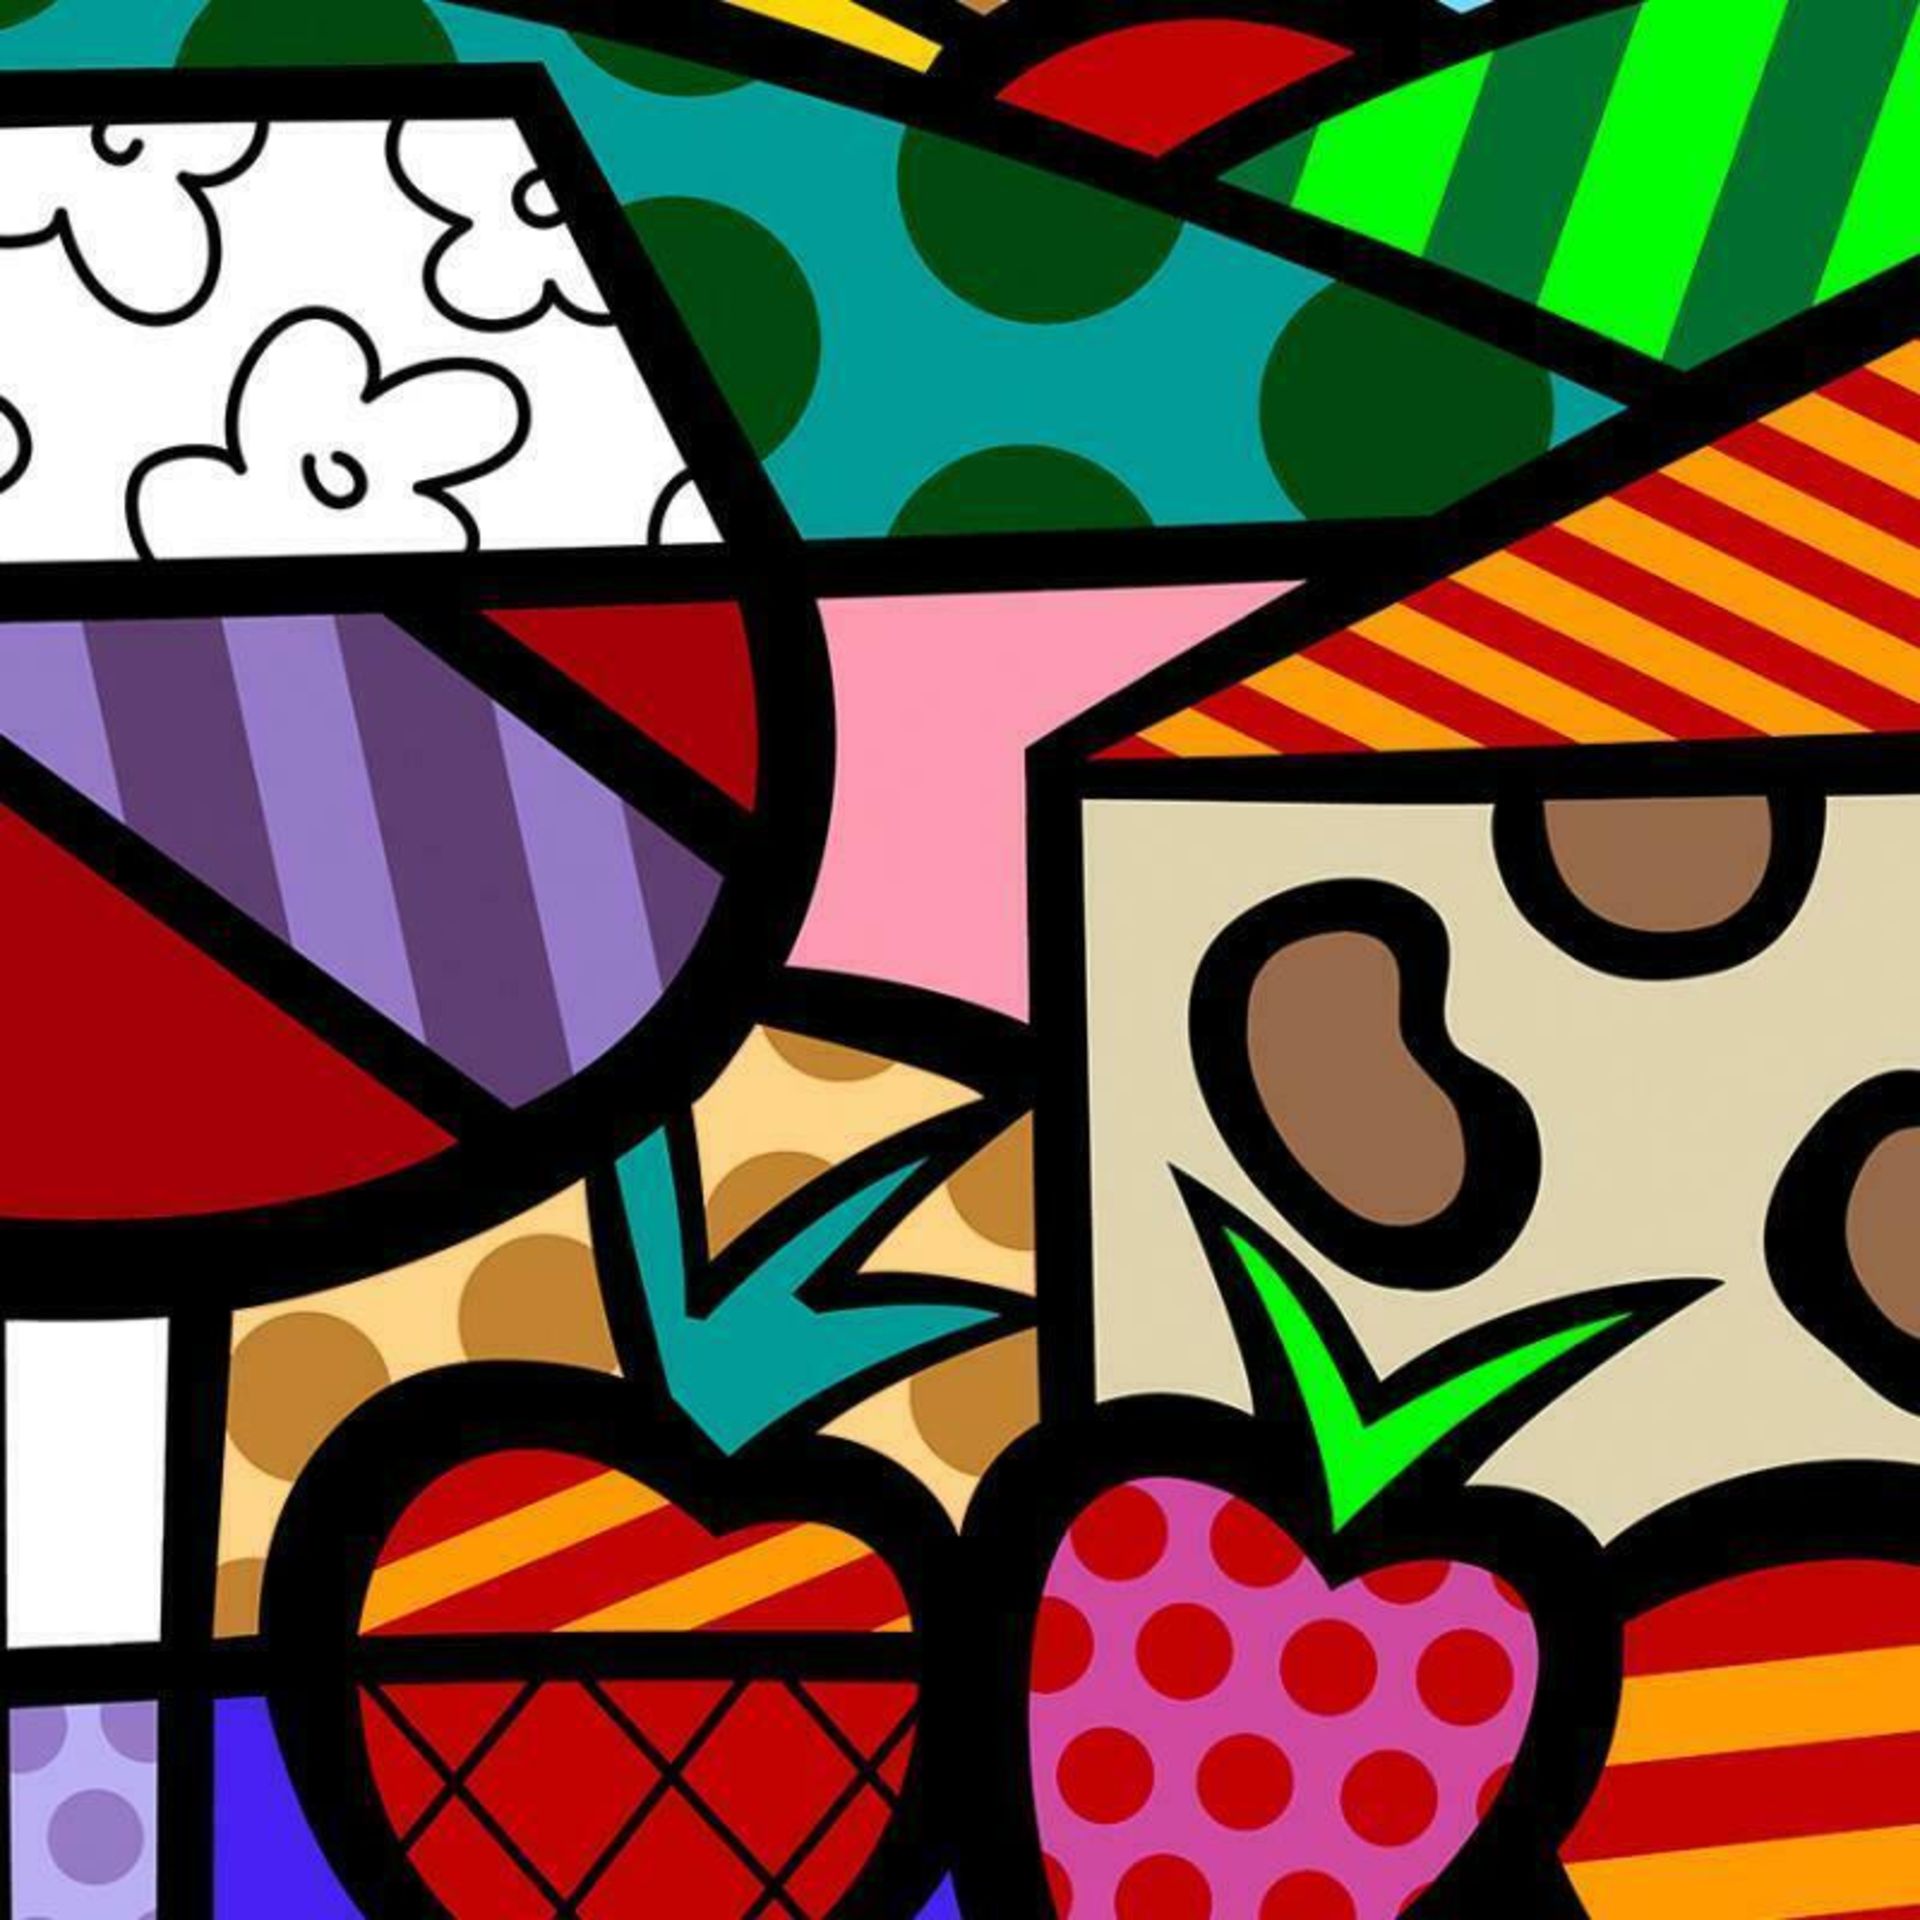 Toast To Life by Britto, Romero - Image 2 of 2